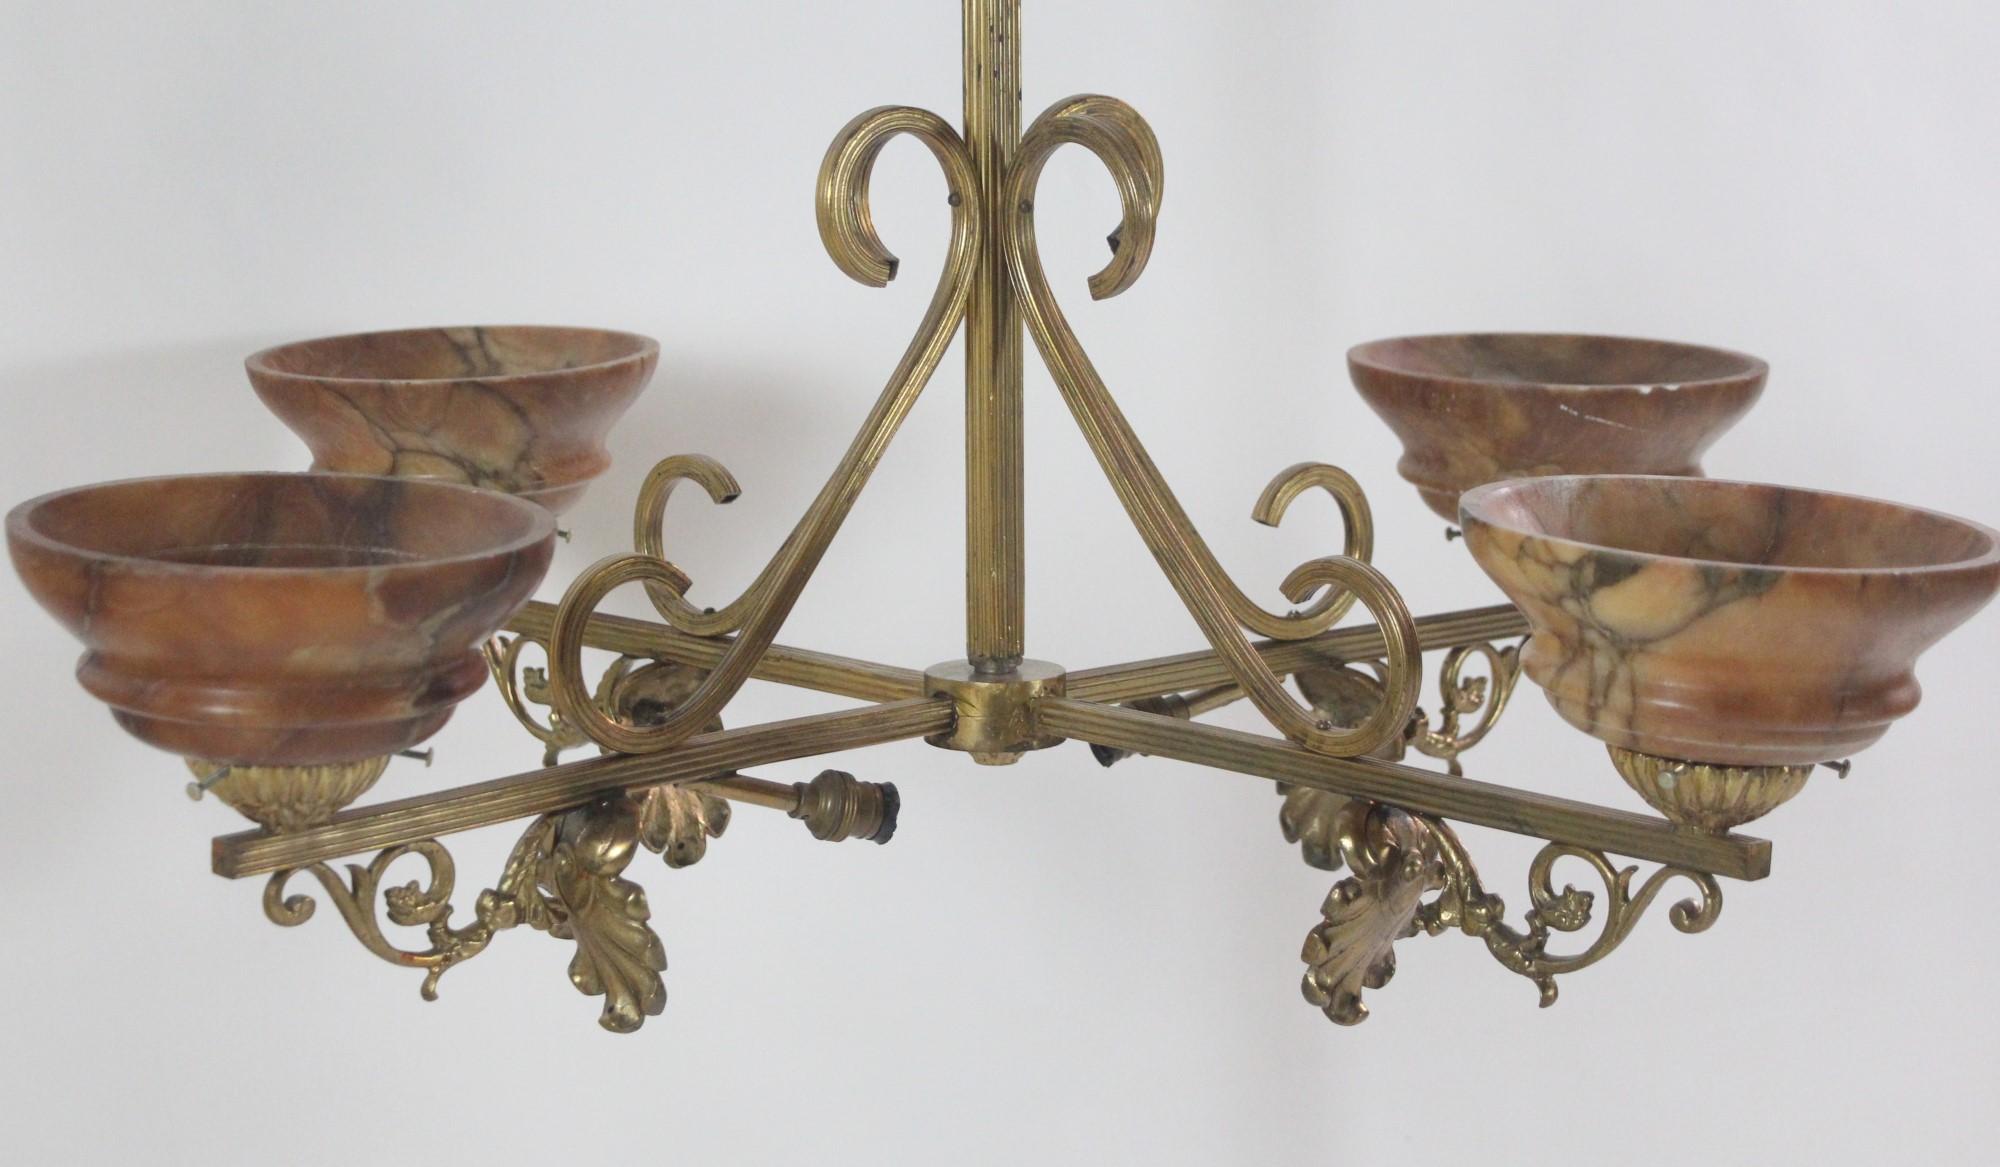 Early 20th Century 1920s French Brass Chandelier w/ 4 Arms and Alabaster Shades